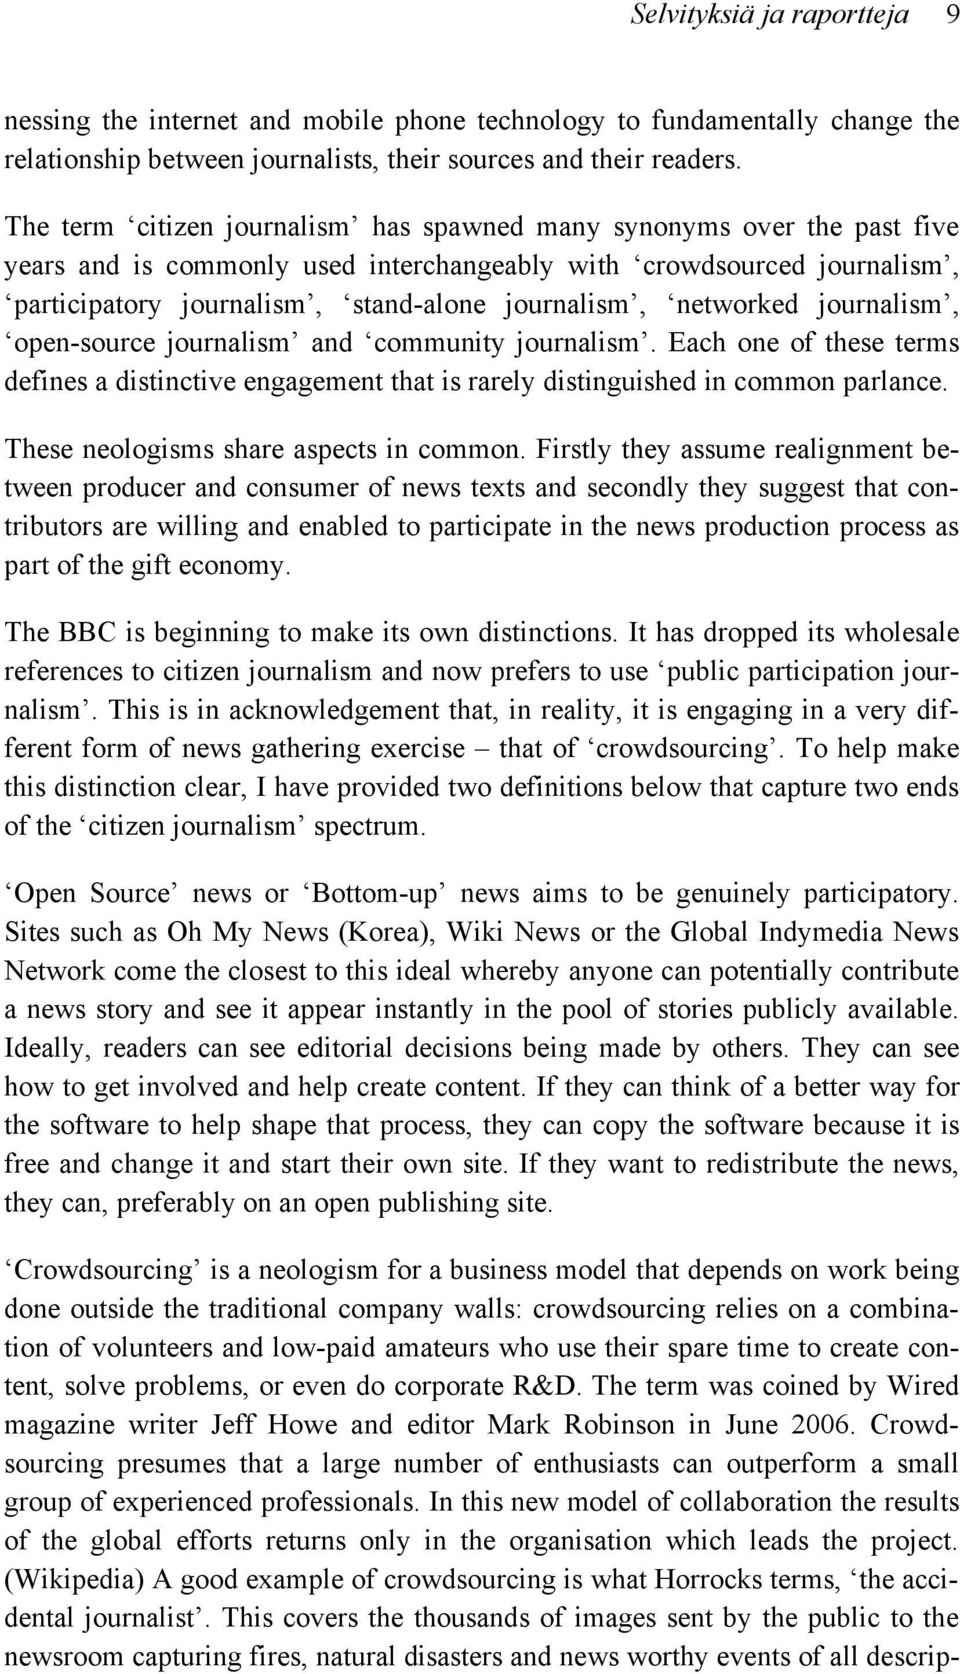 networked journalism, open-source journalism and community journalism. Each one of these terms defines a distinctive engagement that is rarely distinguished in common parlance.